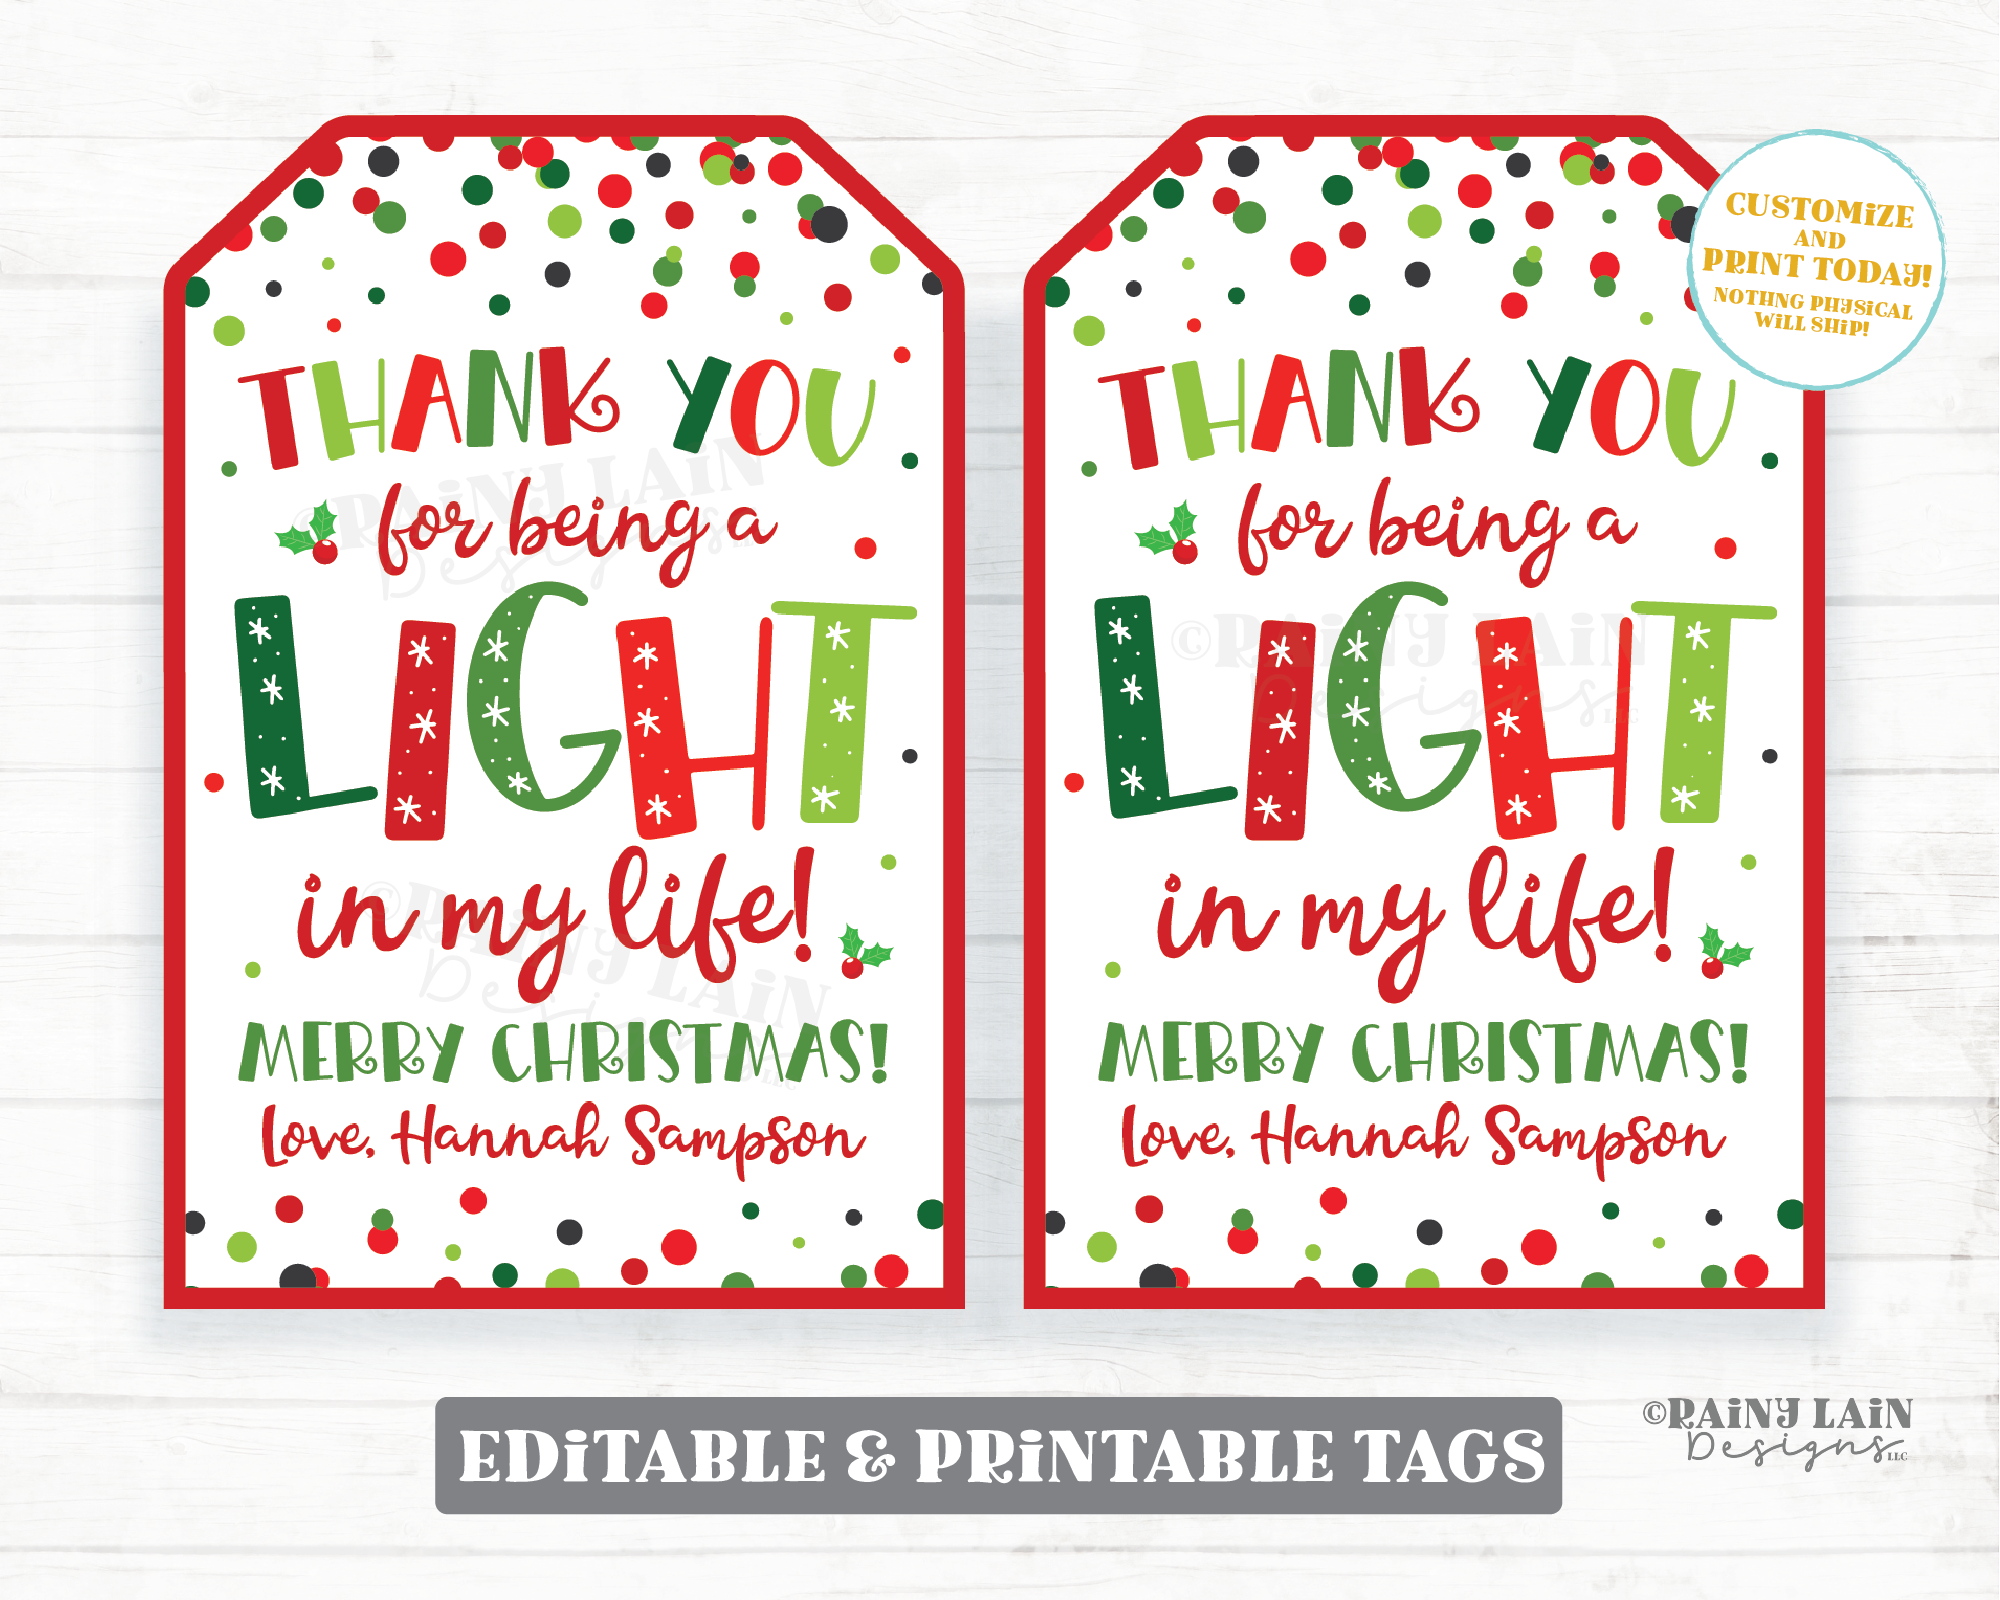 Thank you for being a light in my life Christmas Candle Tag Holiday Lights Gift Flashlight Employee Staff Teacher PTO Thank you Appreciation